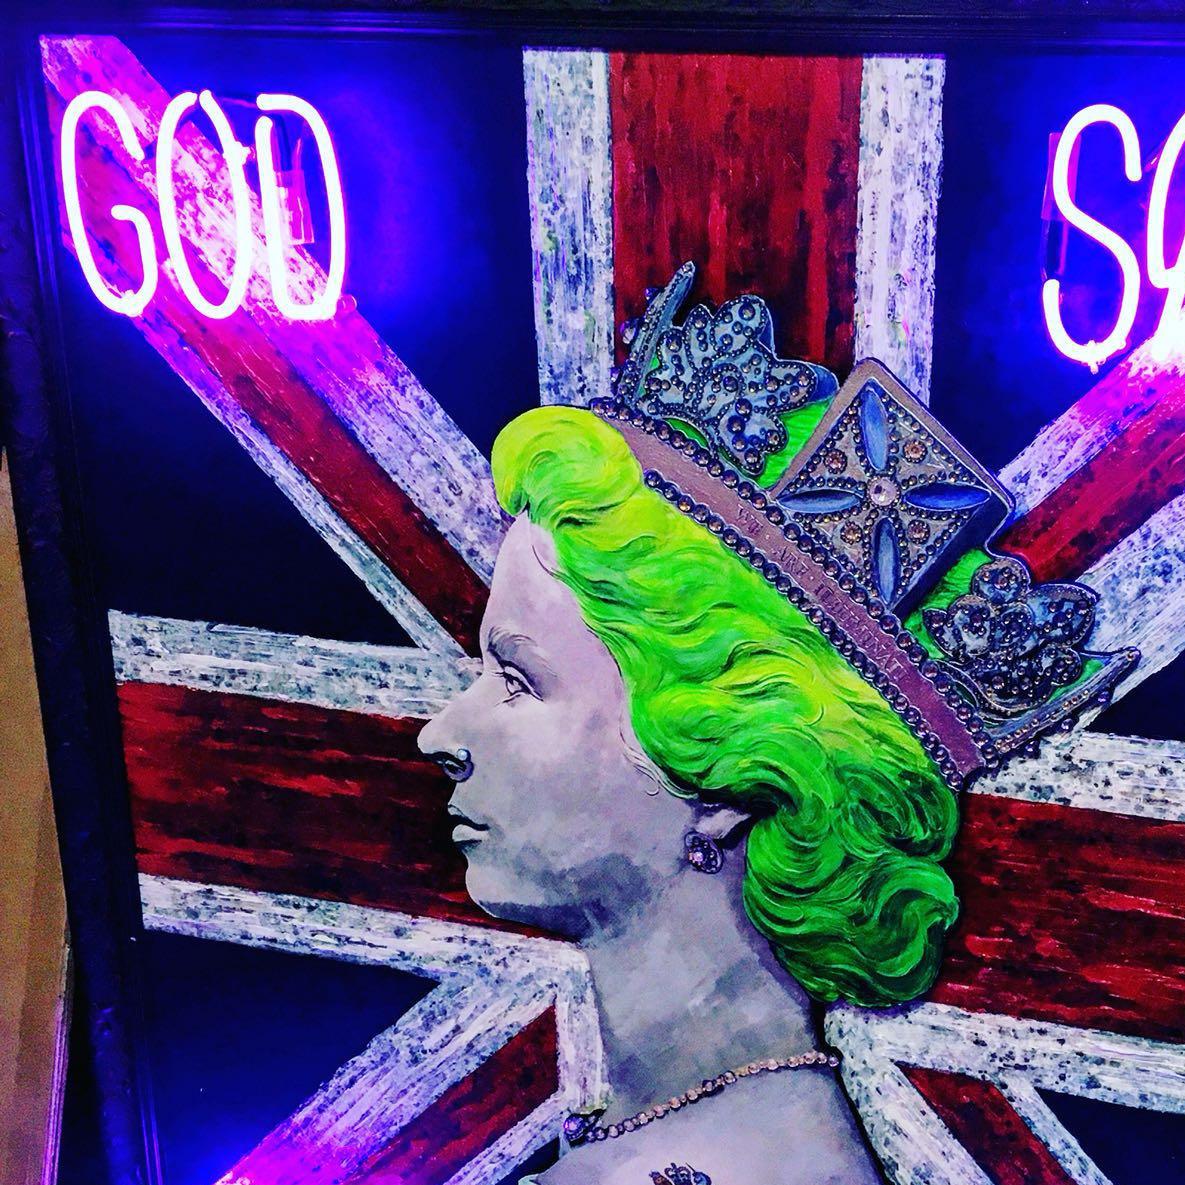 God Save the Queen neon art  - Contemporary Art by Mark Sloper